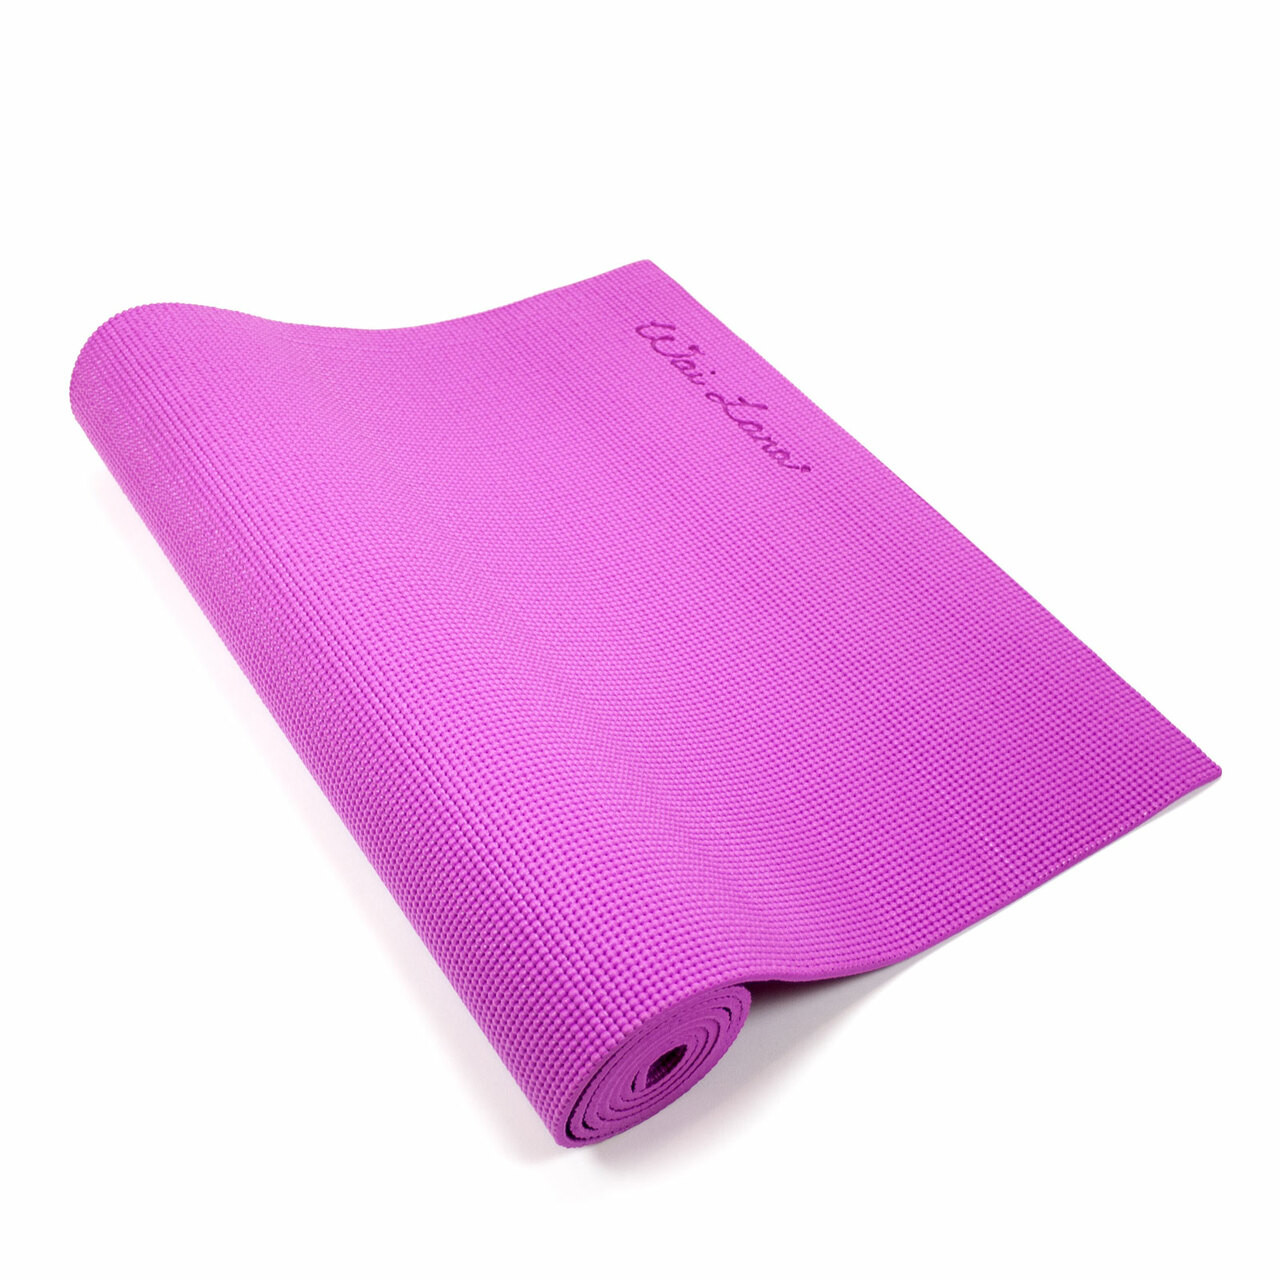 https://cdn11.bigcommerce.com/s-nw401/images/stencil/1280x1280/products/516/3102/Extra_Thick_Yoga_Pilates_Mat__12-purple__35019.1661191703.jpg?c=2